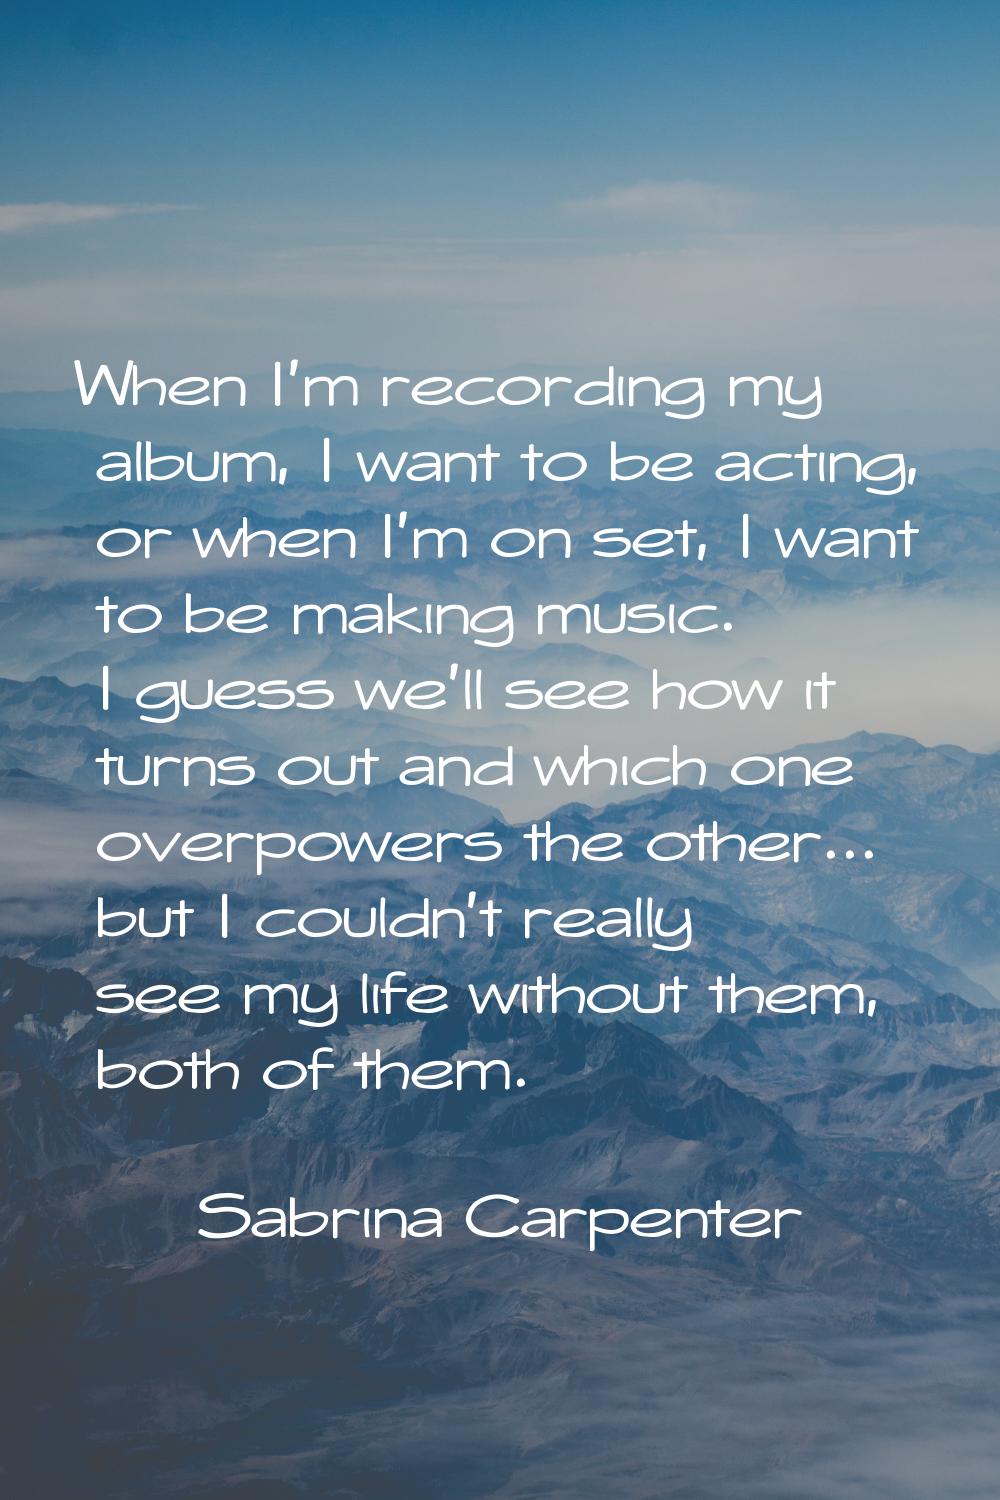 When I'm recording my album, I want to be acting, or when I'm on set, I want to be making music. I 